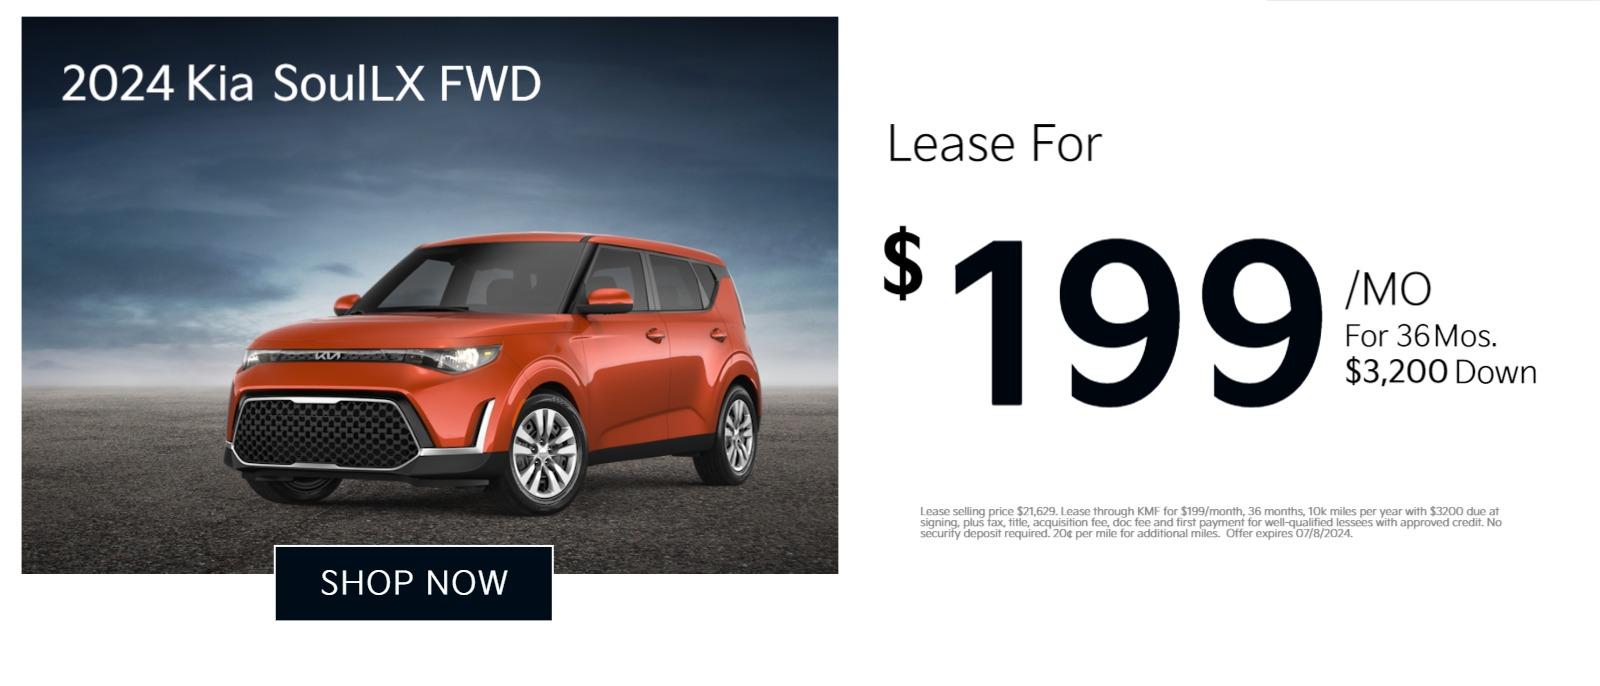 2024 Kia Soul LX FWD
Lease for
$199/mo
For 36 Months. $3,200 Down